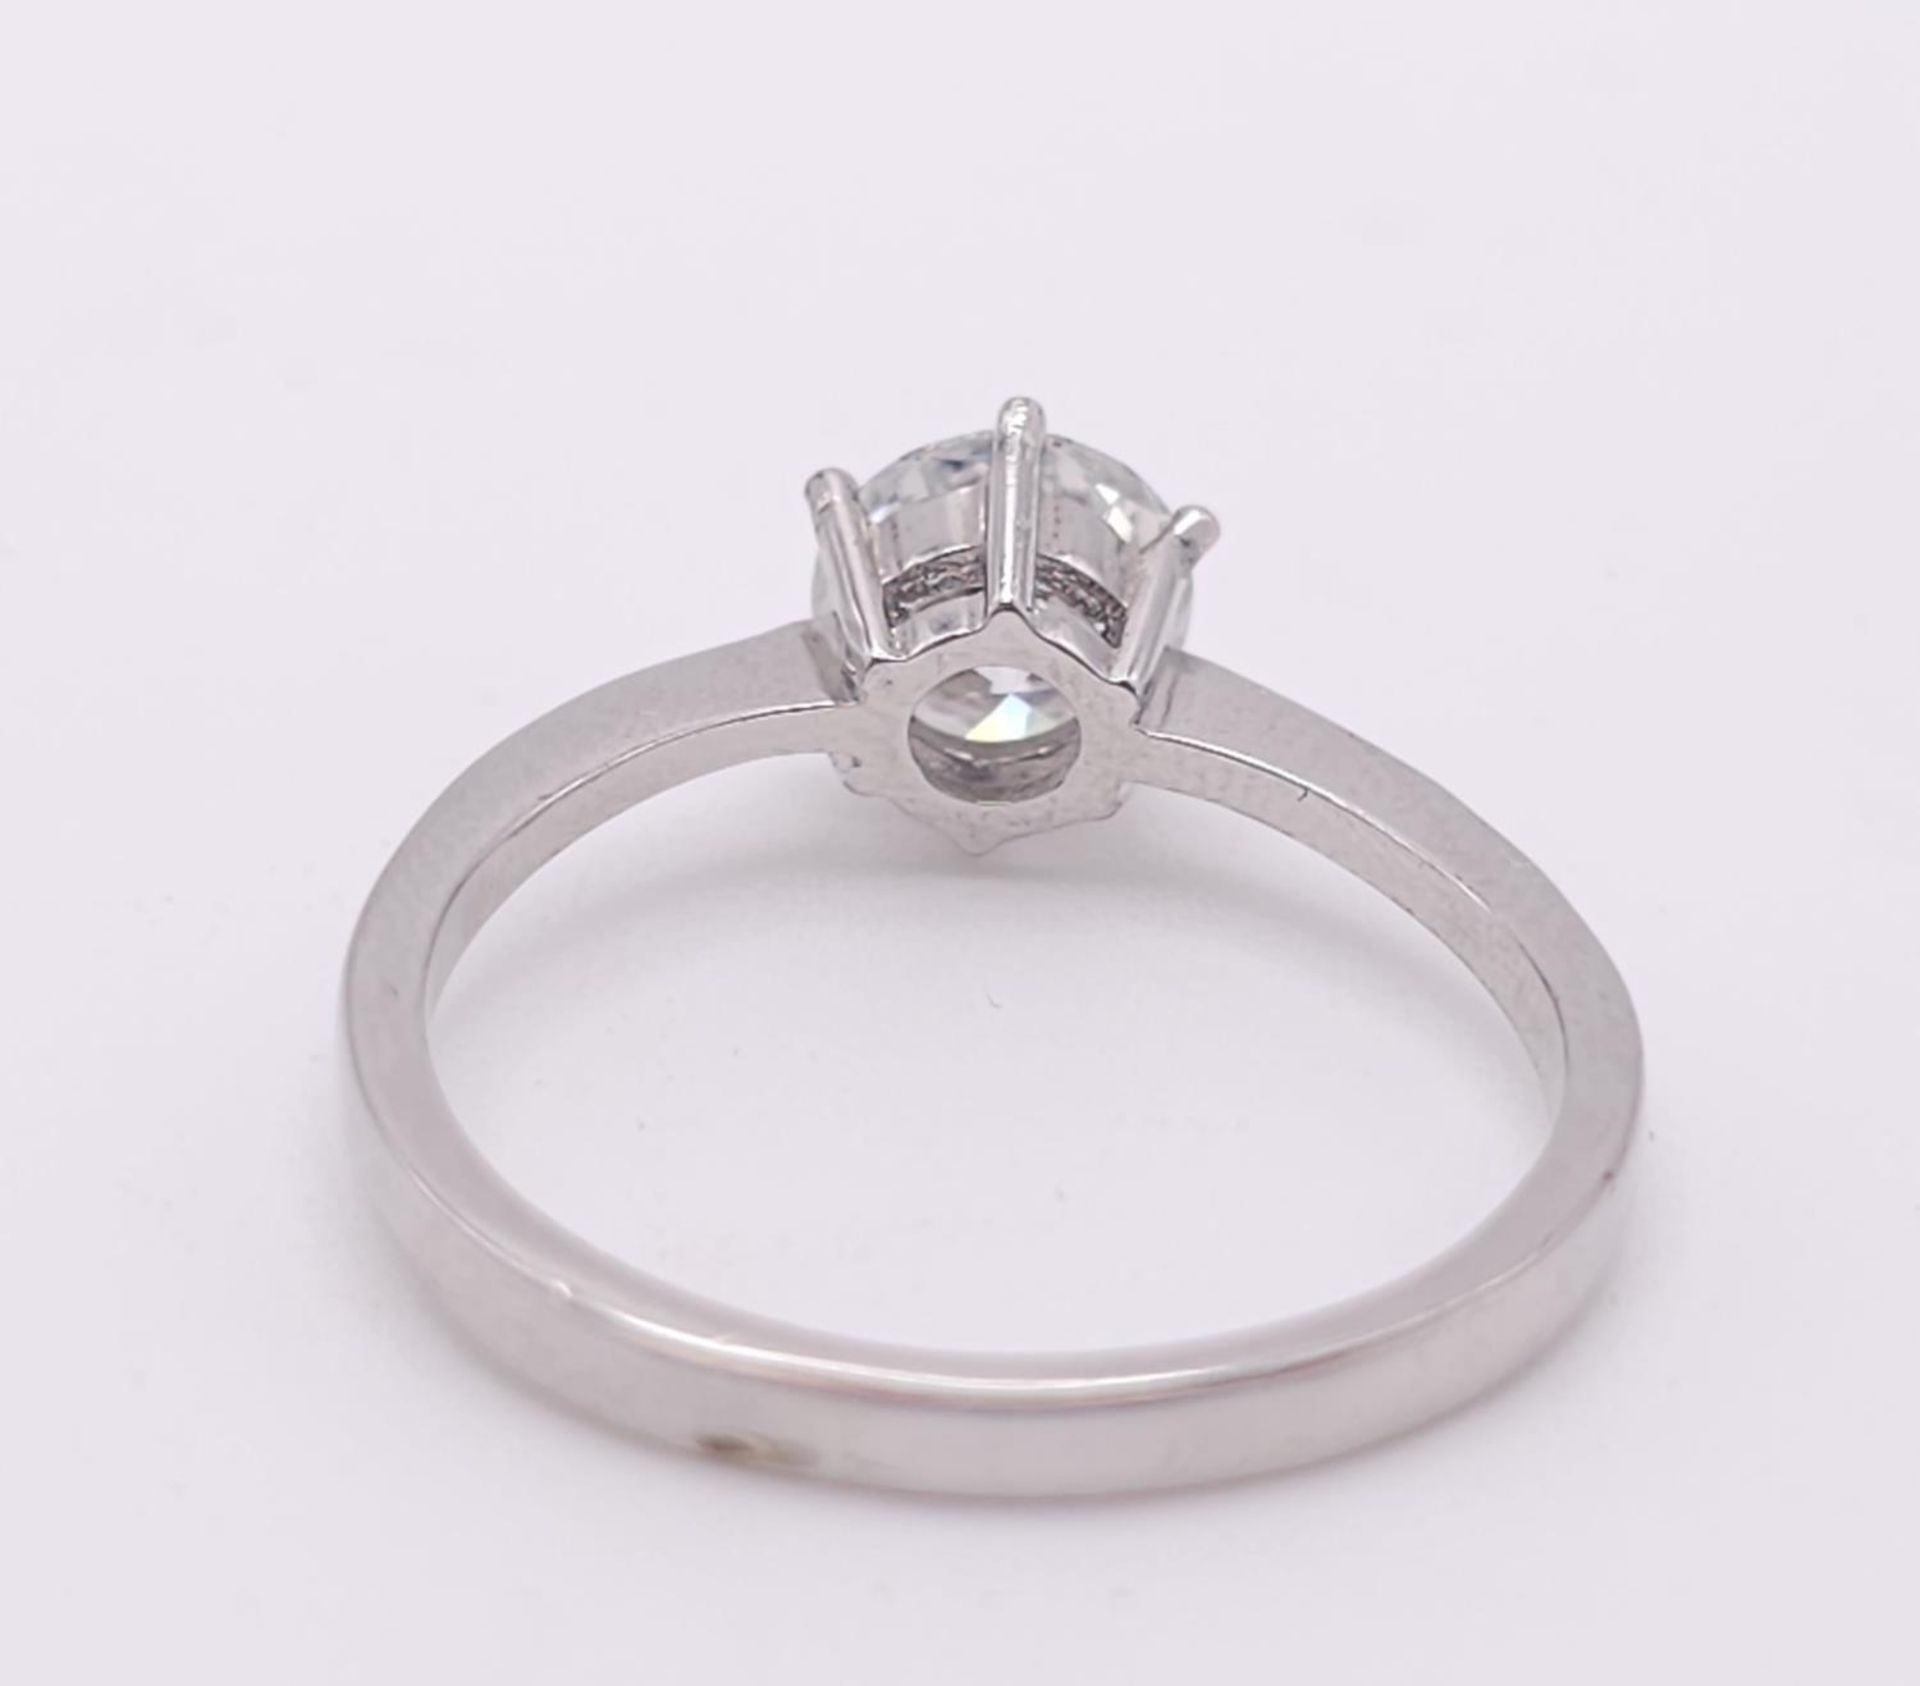 A 1ct Moissanite 925 Silver Ring. Size N. Comes with a GRA certificate. - Image 4 of 7